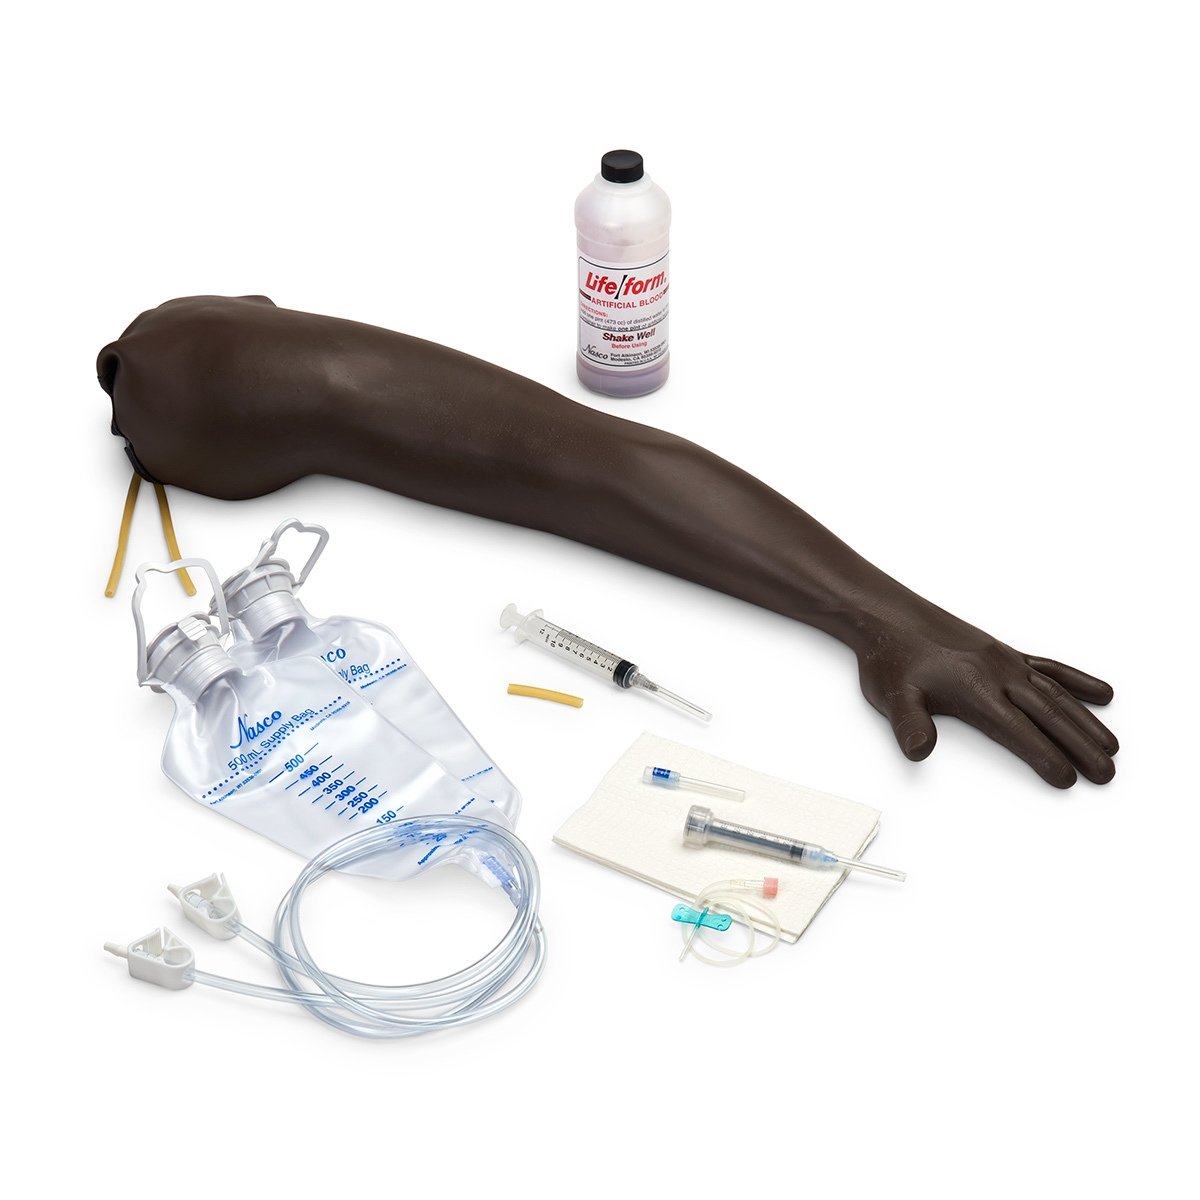 Life/form Adult Venipuncture and Injection Training Arm - Dark